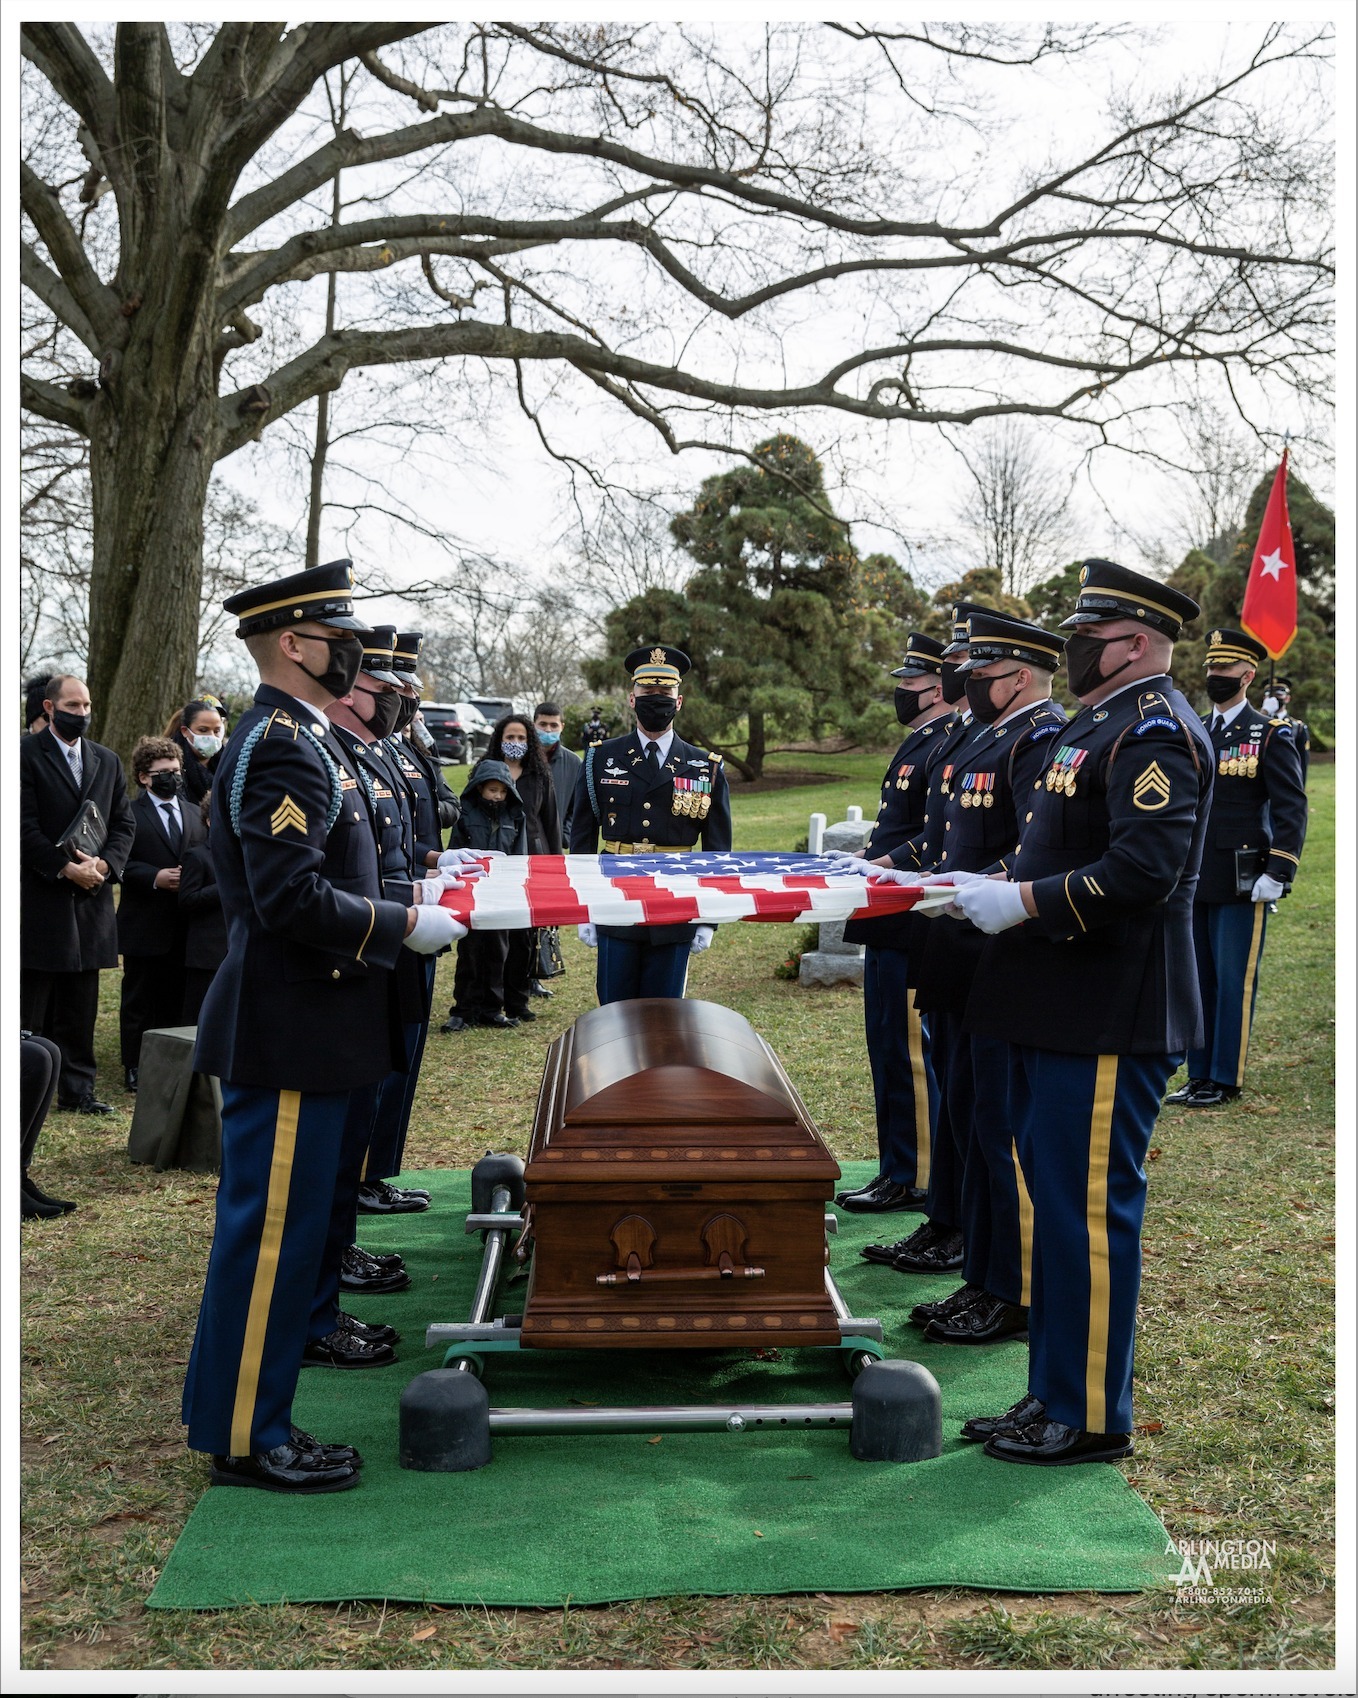 A US Army infantry company prepares to fold a flag at the funeral service of a General Officer in Arlington National Cemetery.